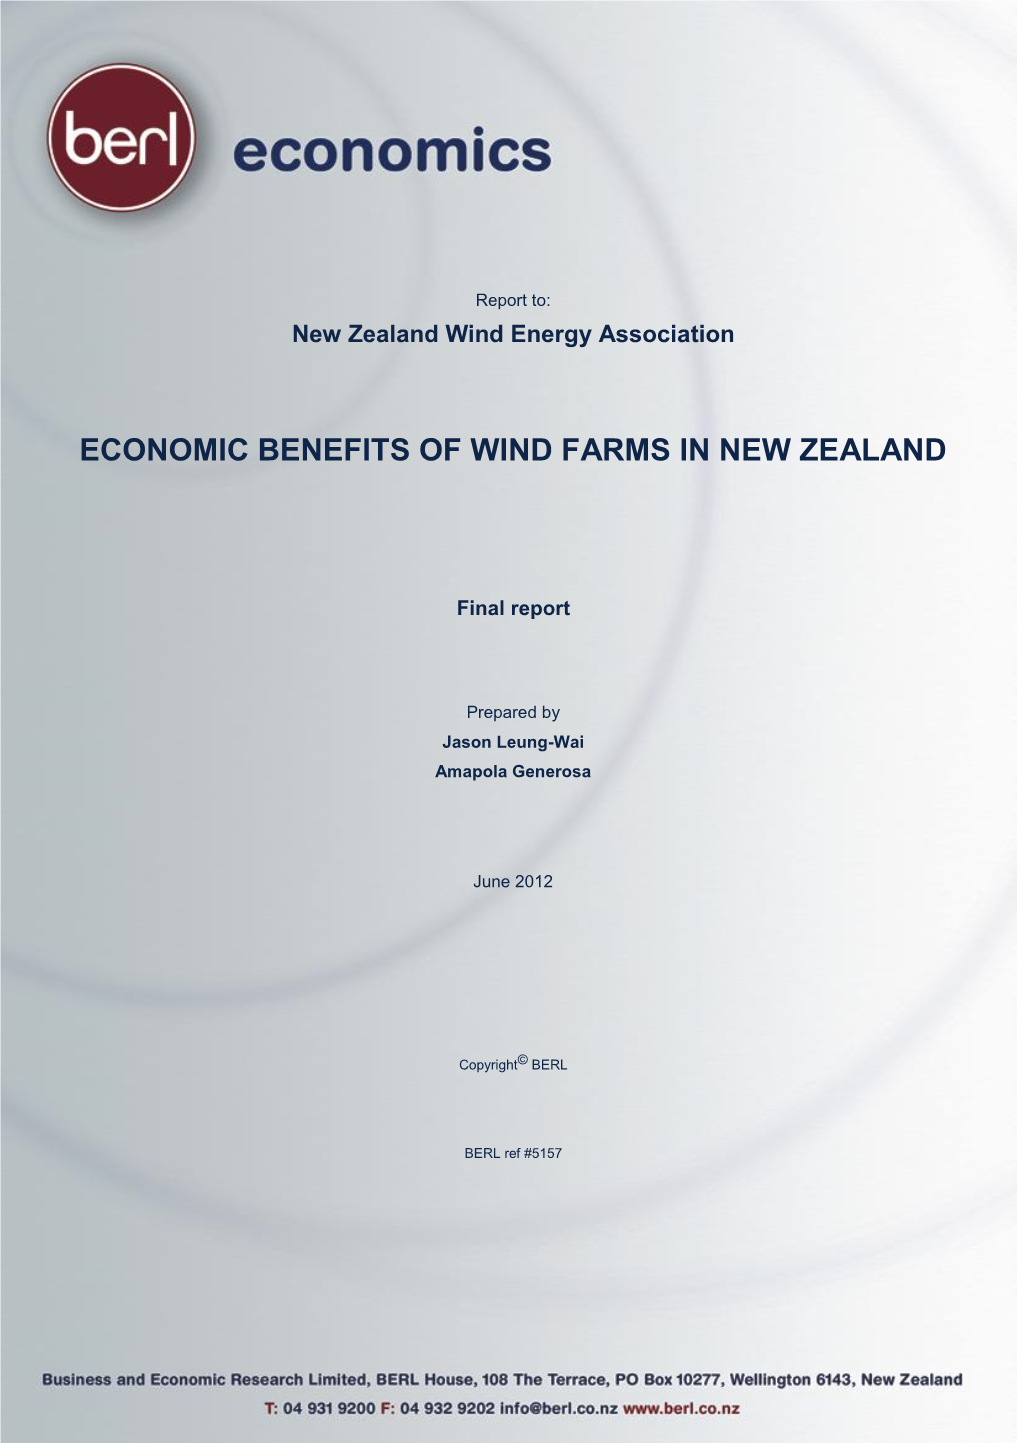 Economic Benefits of Wind Farms in New Zealand